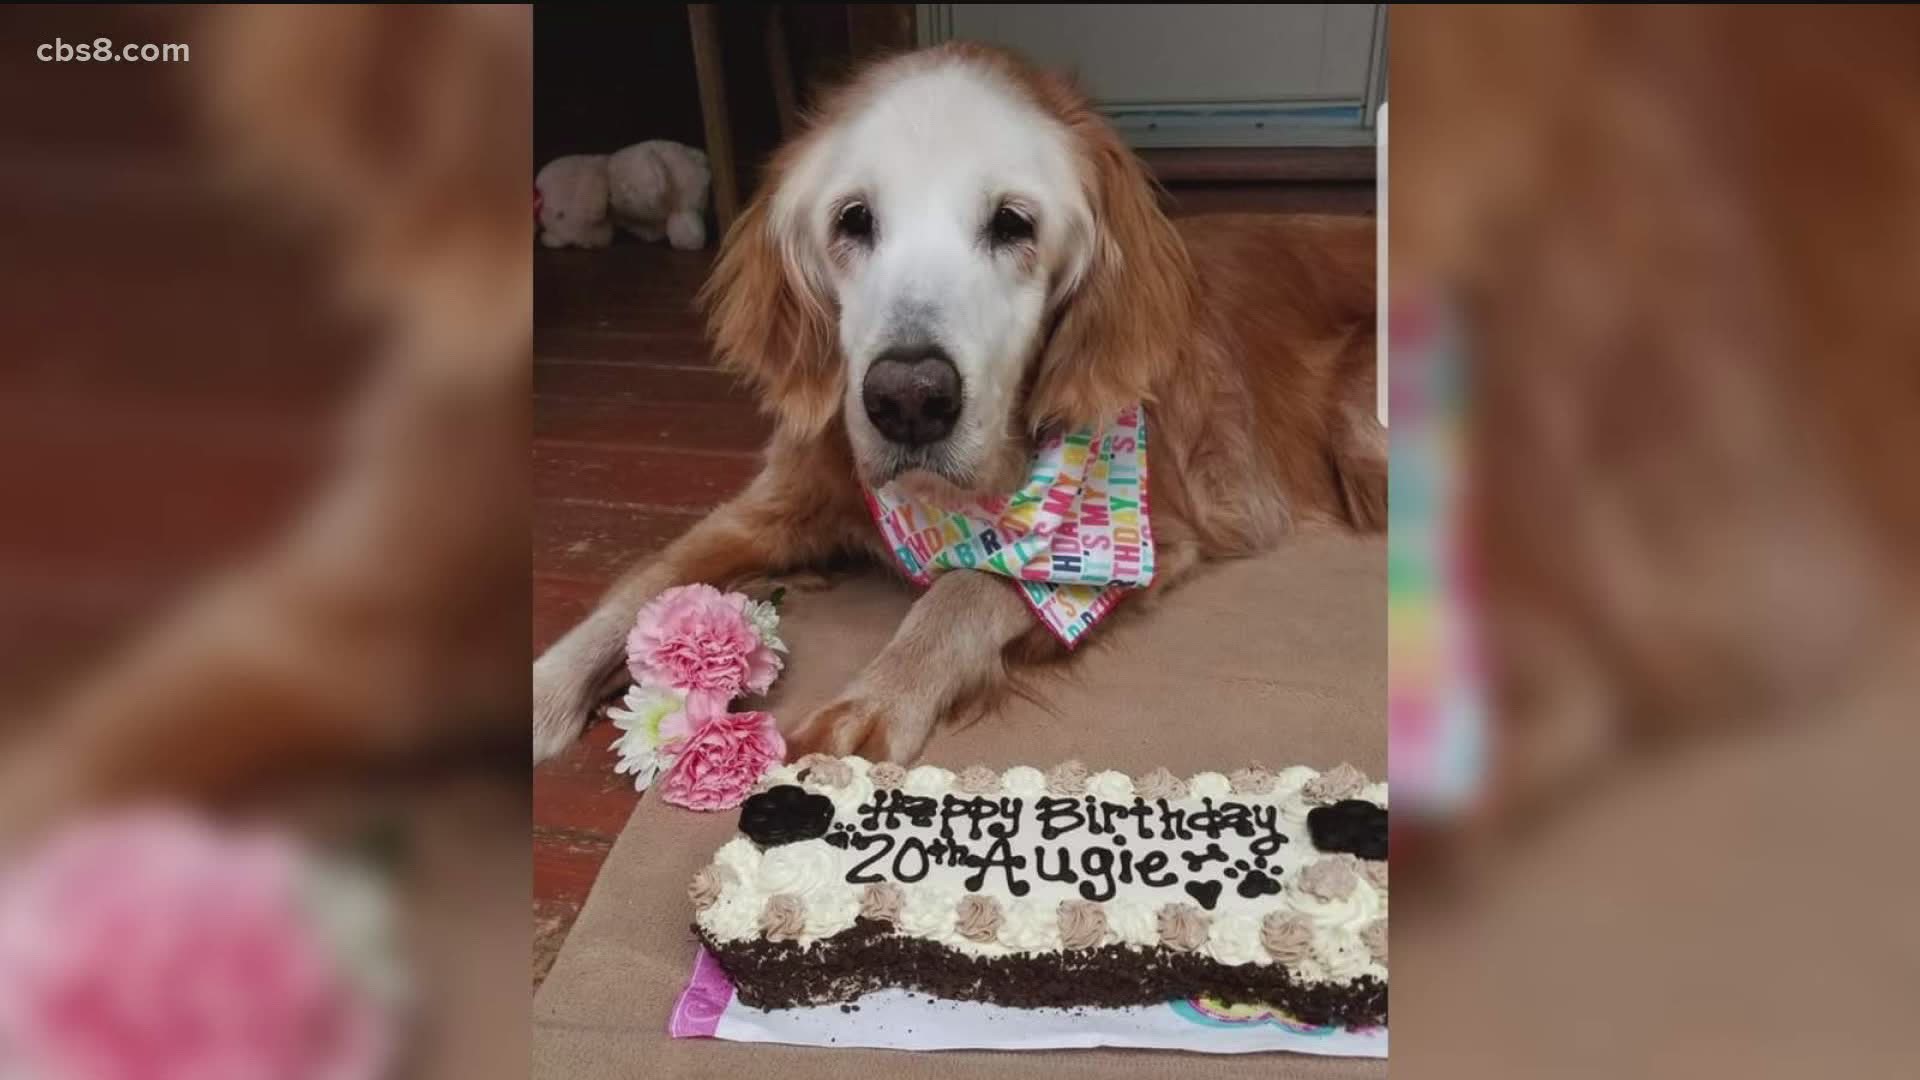 This update includes another political stance from an ice cream maker, trolls come after Savannah Guthrie & the world's oldest golden retriever is celebrating a bday